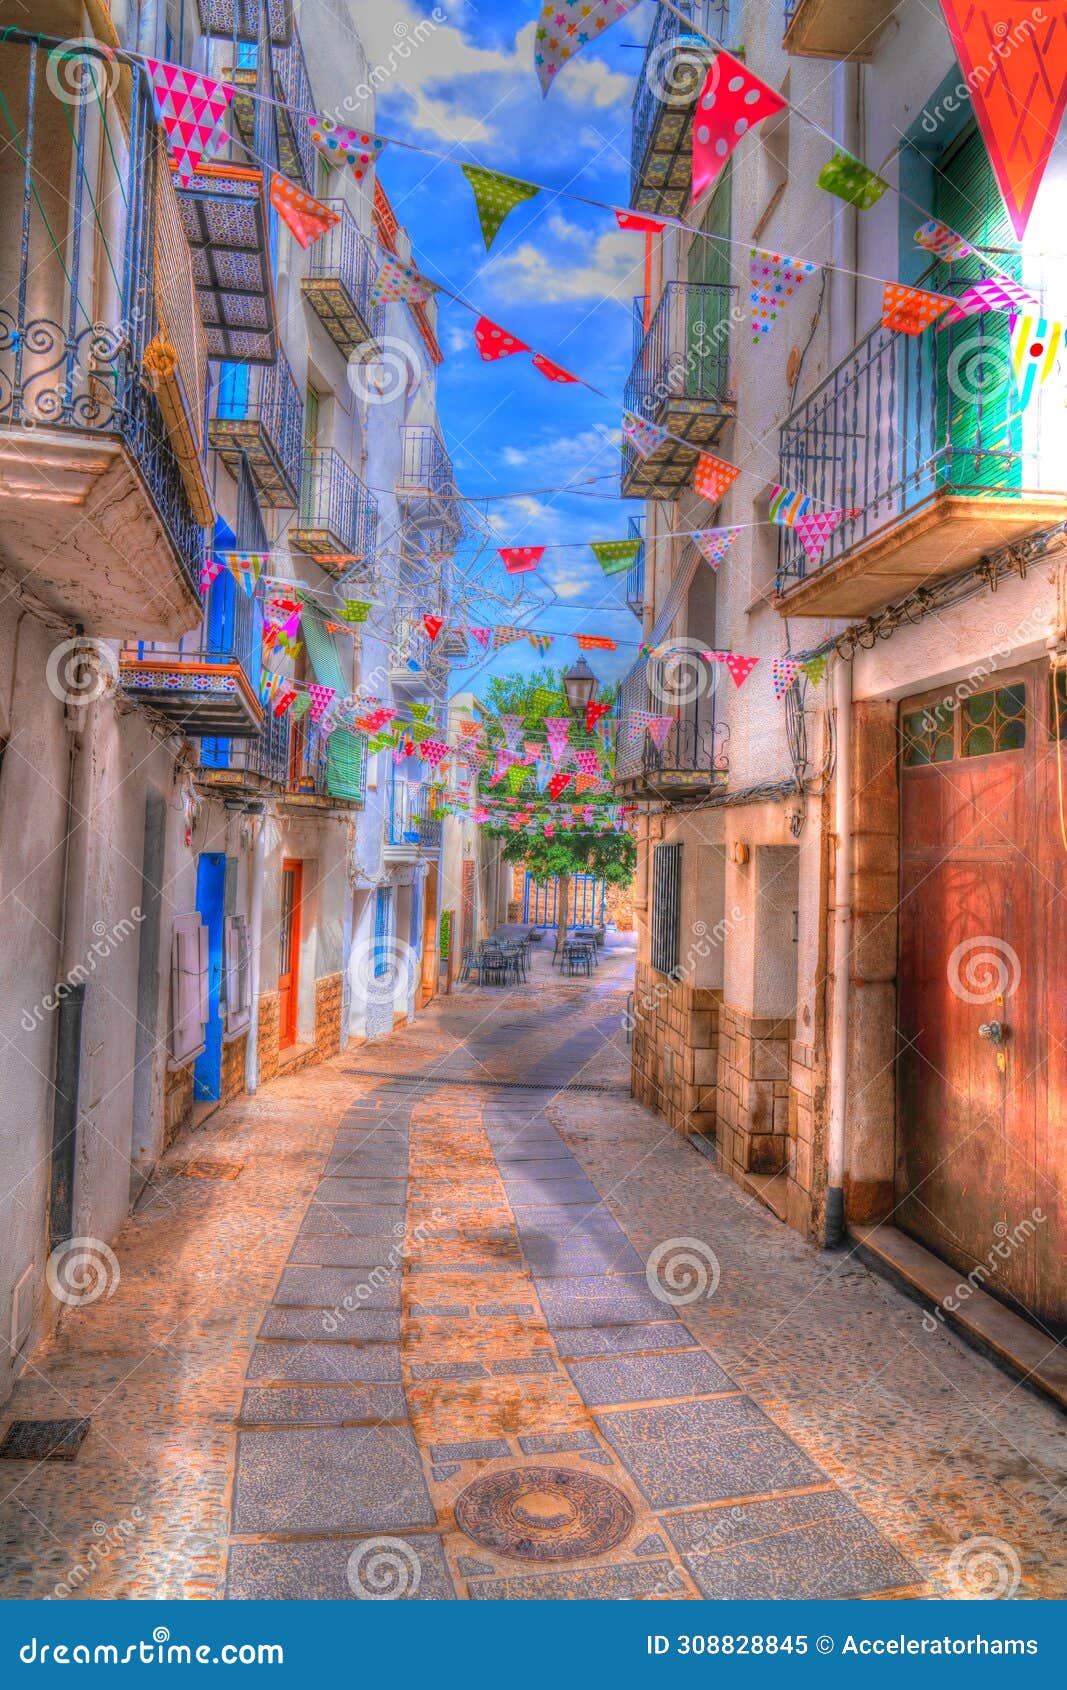 casco antiguo peniscola old town narrow street within the castle walls spain